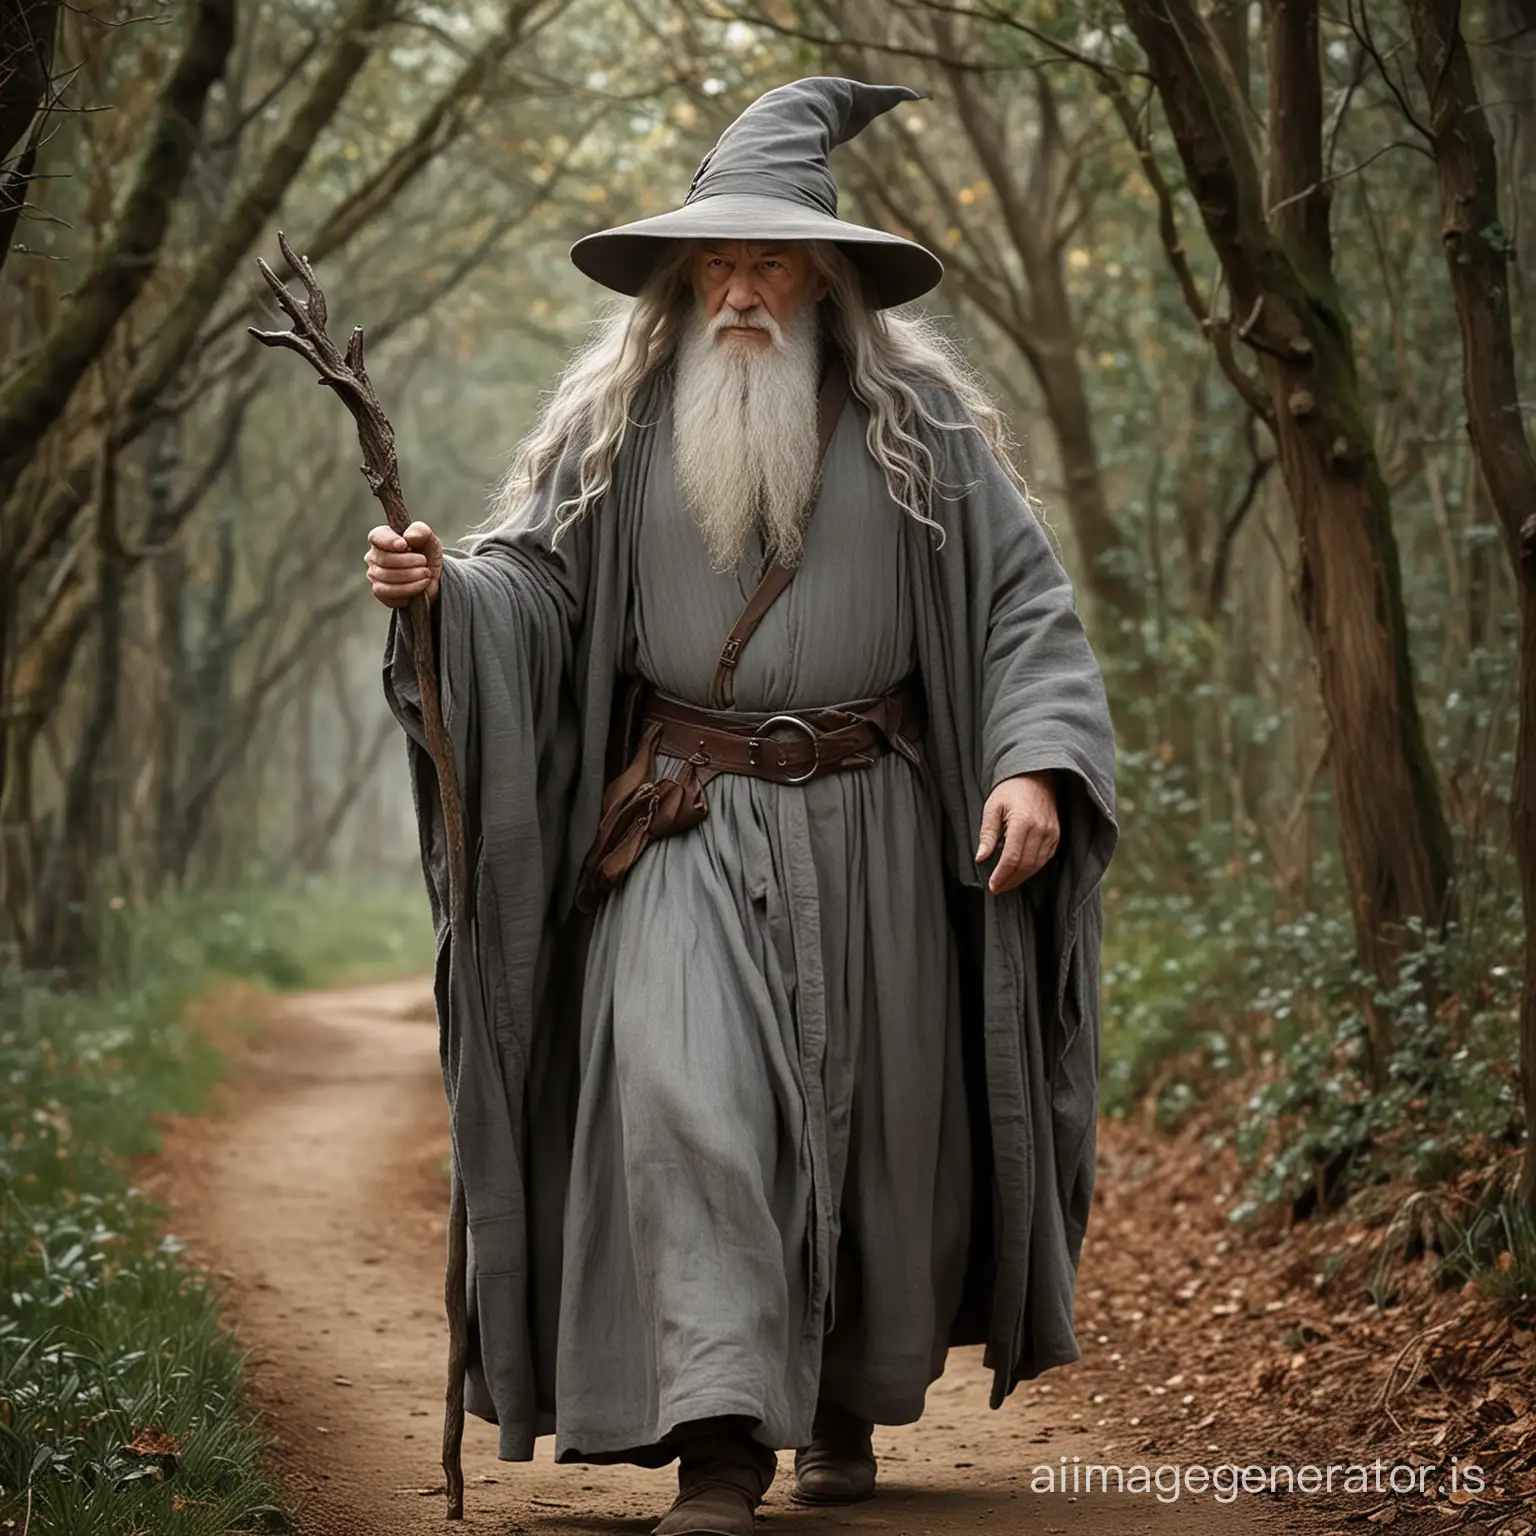 Gandalf the Grey is described as a tall and imposing figure with long, flowing white hair and a beard. His eyes are keen and piercing, reflecting his deep wisdom and inner strength. He often carries a staff, which he uses both as a walking stick and as a focus for his magical powers.

In terms of attire, Gandalf typically wears a long, flowing grey robe that billows around him as he moves. The fabric is plain and weathered, reflecting his humble and unassuming nature. Over his robe, he wears a wide-brimmed hat, known as a pointed hat or a wizard's hat, which is adorned with a wide, floppy brim and a pointed crown. The hat adds to his mysterious and iconic appearance.

Around his waist, Gandalf often wears a belt, which serves both as a practical accessory for holding various items and as a symbolic representation of his authority and status as a wizard. His overall appearance is that of a wanderer and a sage, someone who is both worldly and otherworldly, with a timeless and enigmatic presence.